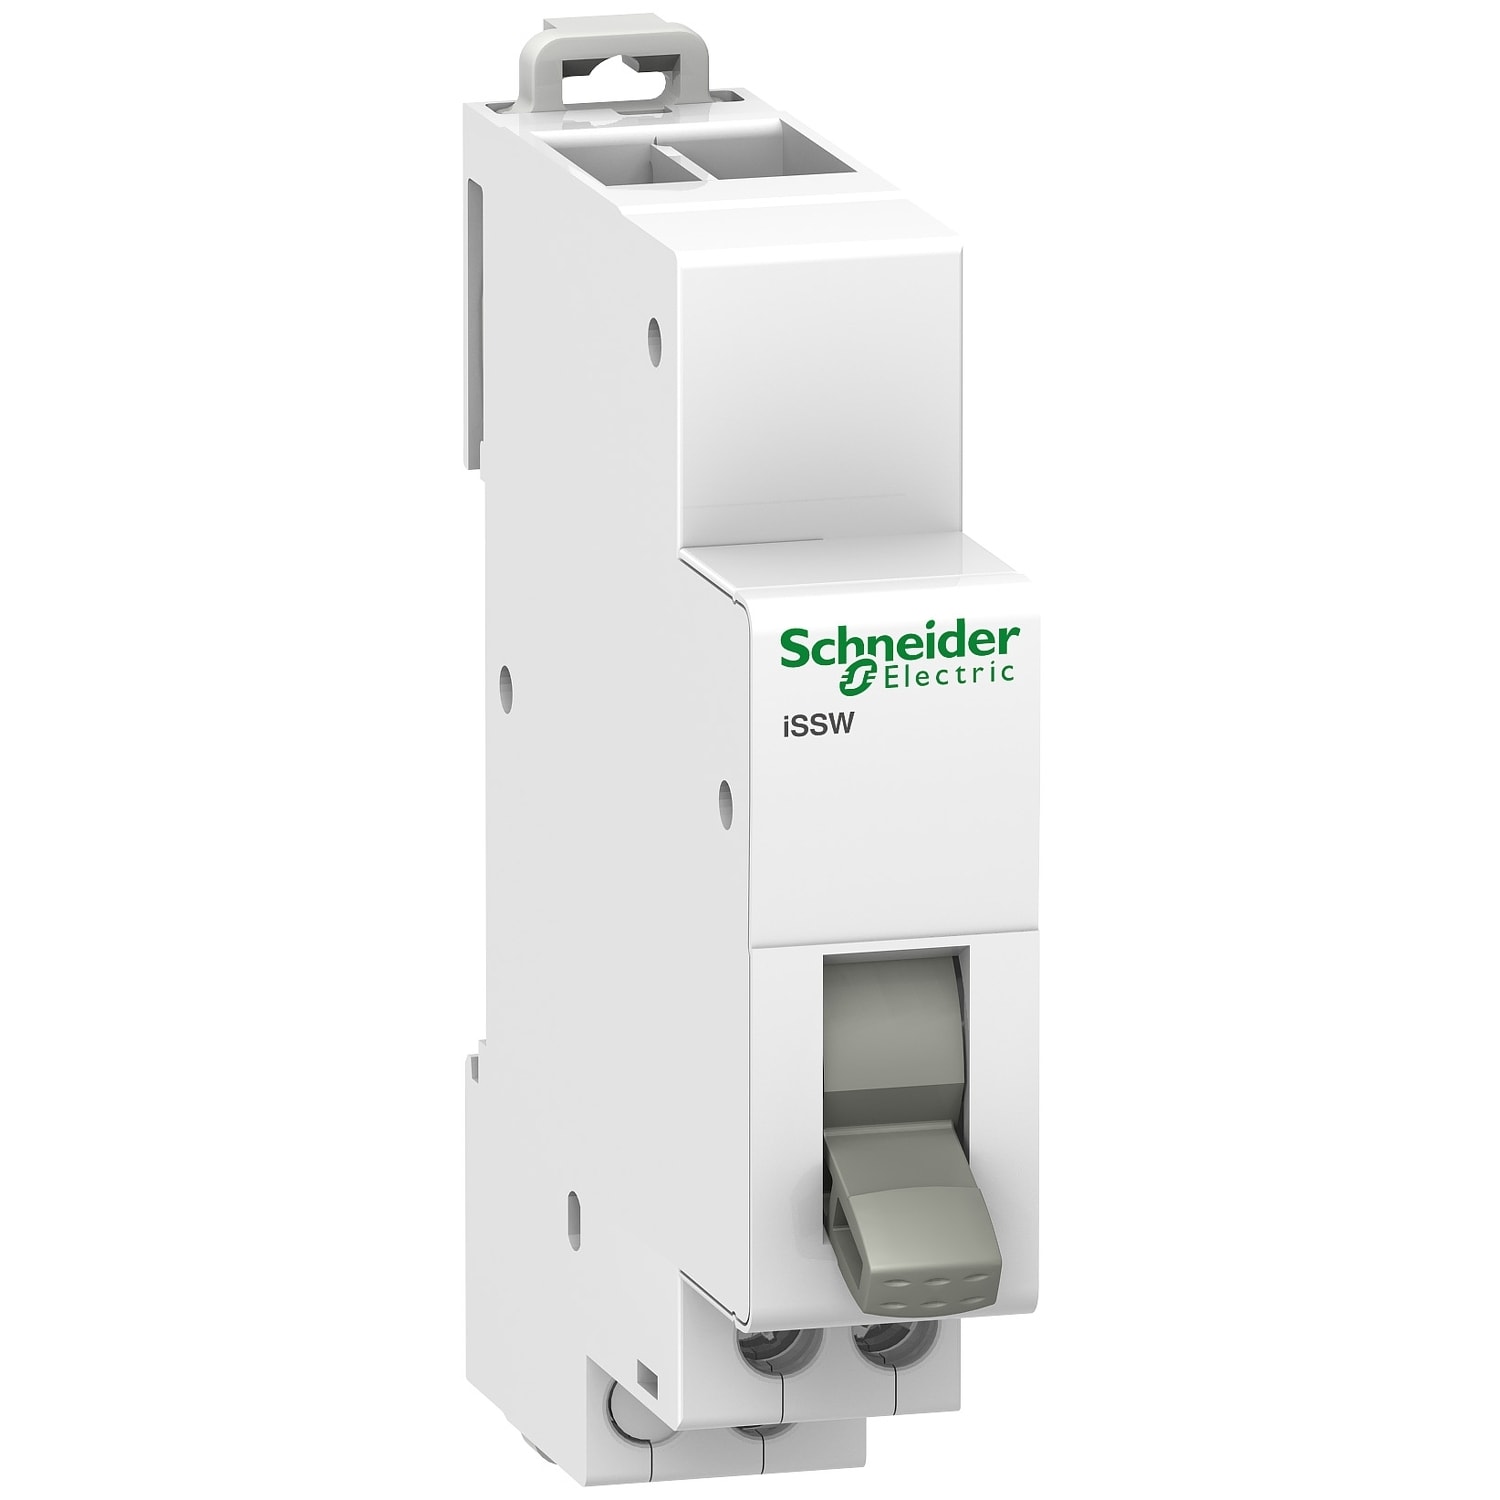 Schneider Electric - Acti9, iSSW commutateur 2 positions 1 contact inverseur OF 20A 230V